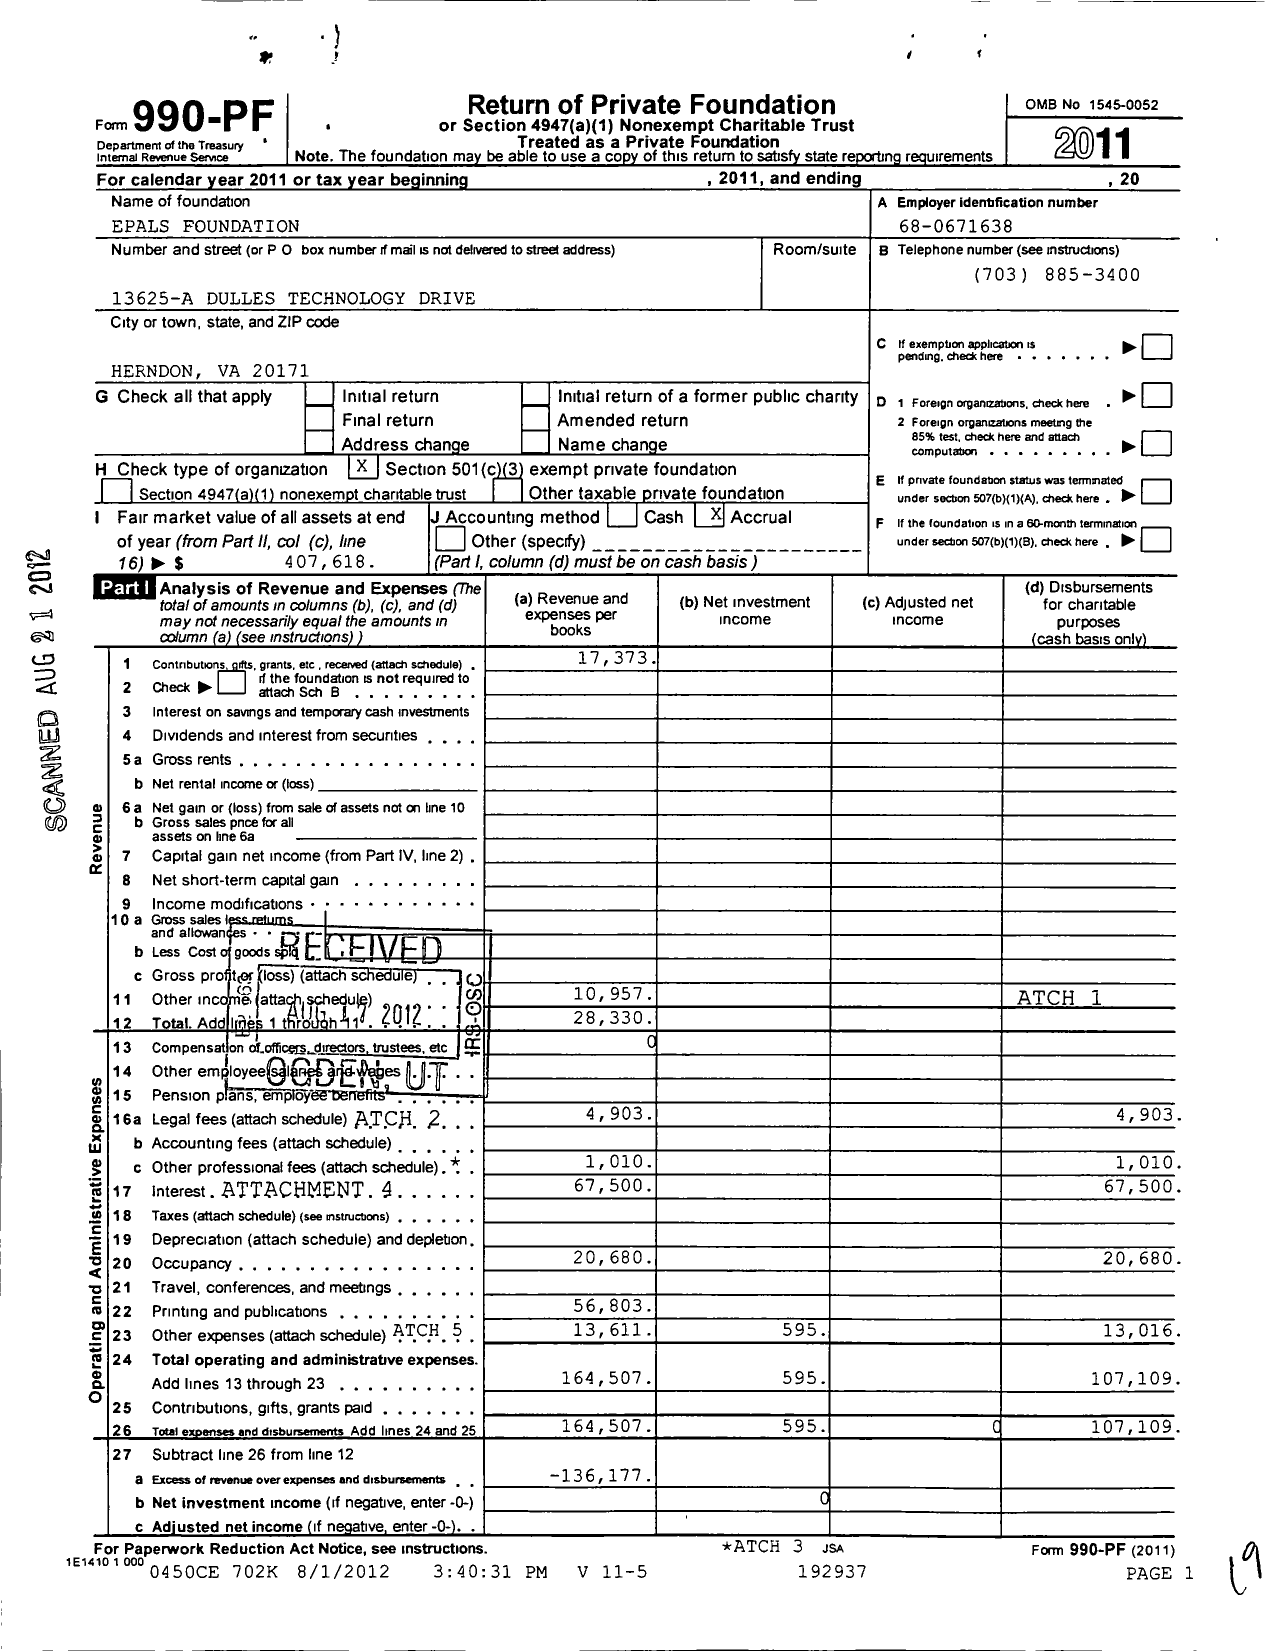 Image of first page of 2011 Form 990PF for Epals Foundation